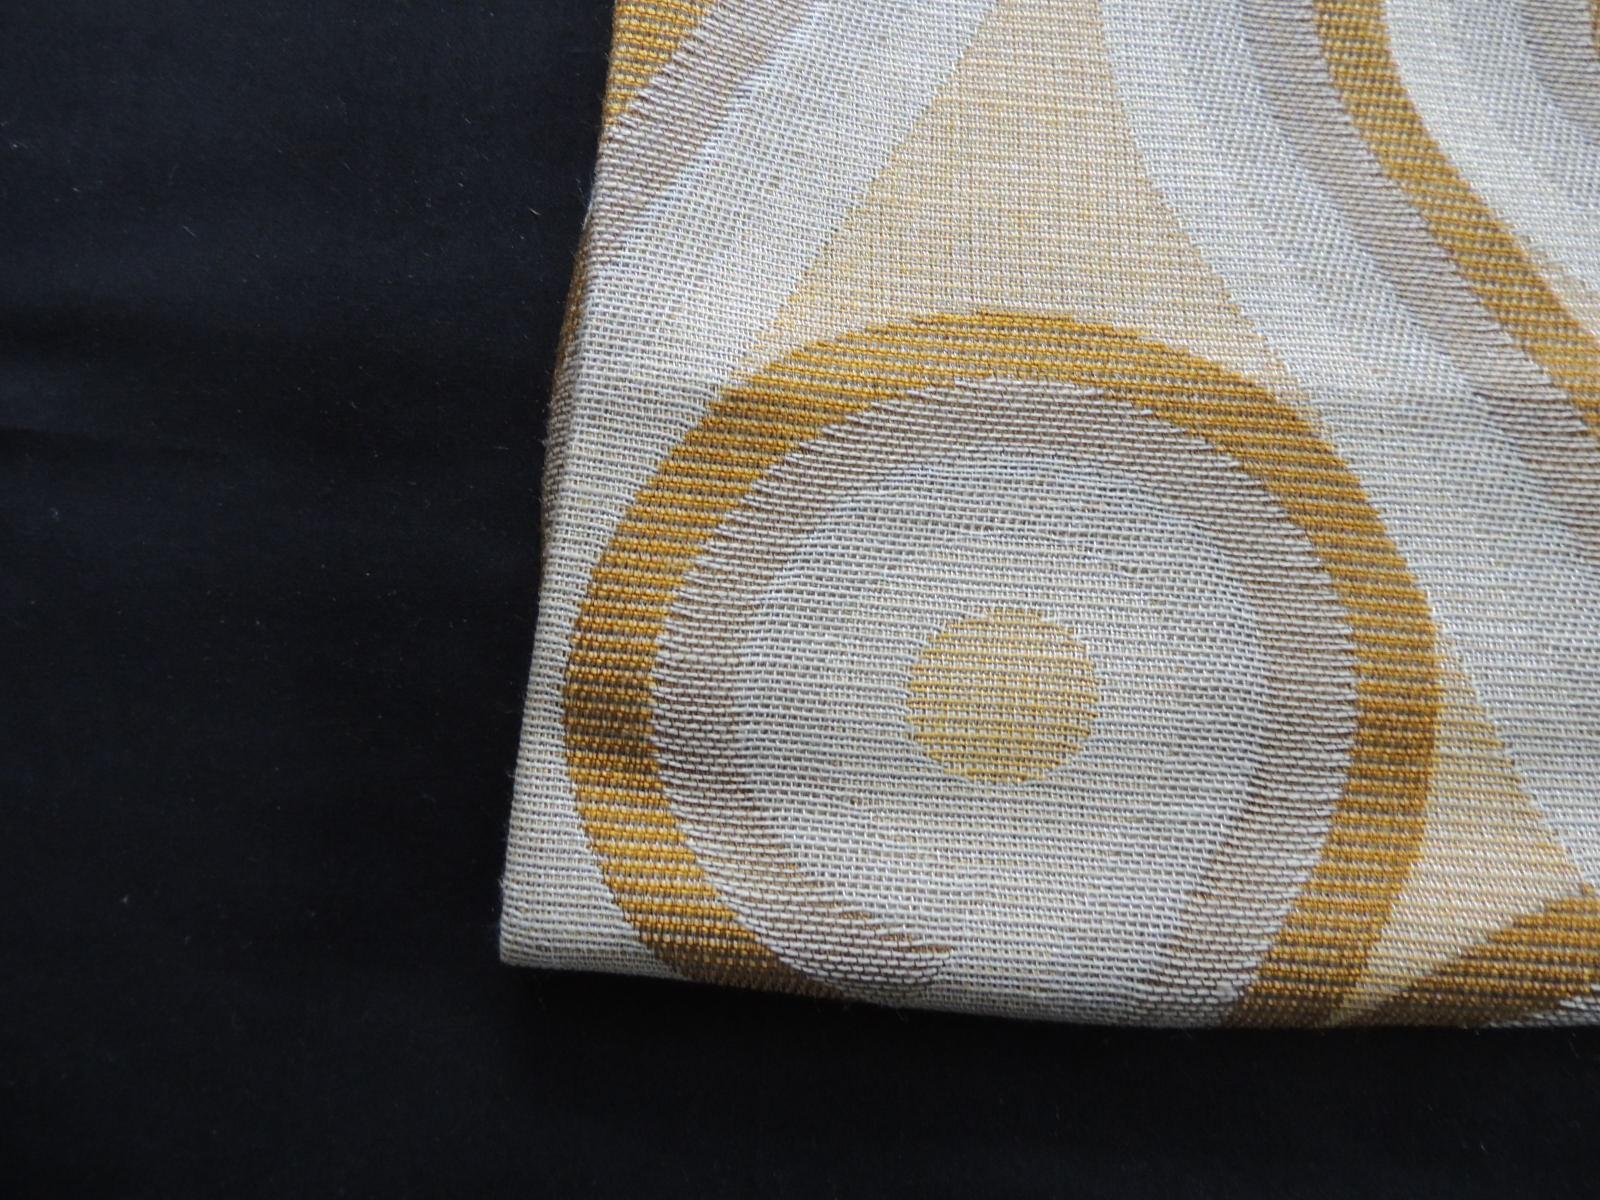 Vintage gold and grey woven deco pattern textile.
Previously made into curtains.
Sold as is.
Ideal for pillows, upholstery or window shades.
Found at the Paris flea market.
Size: 44